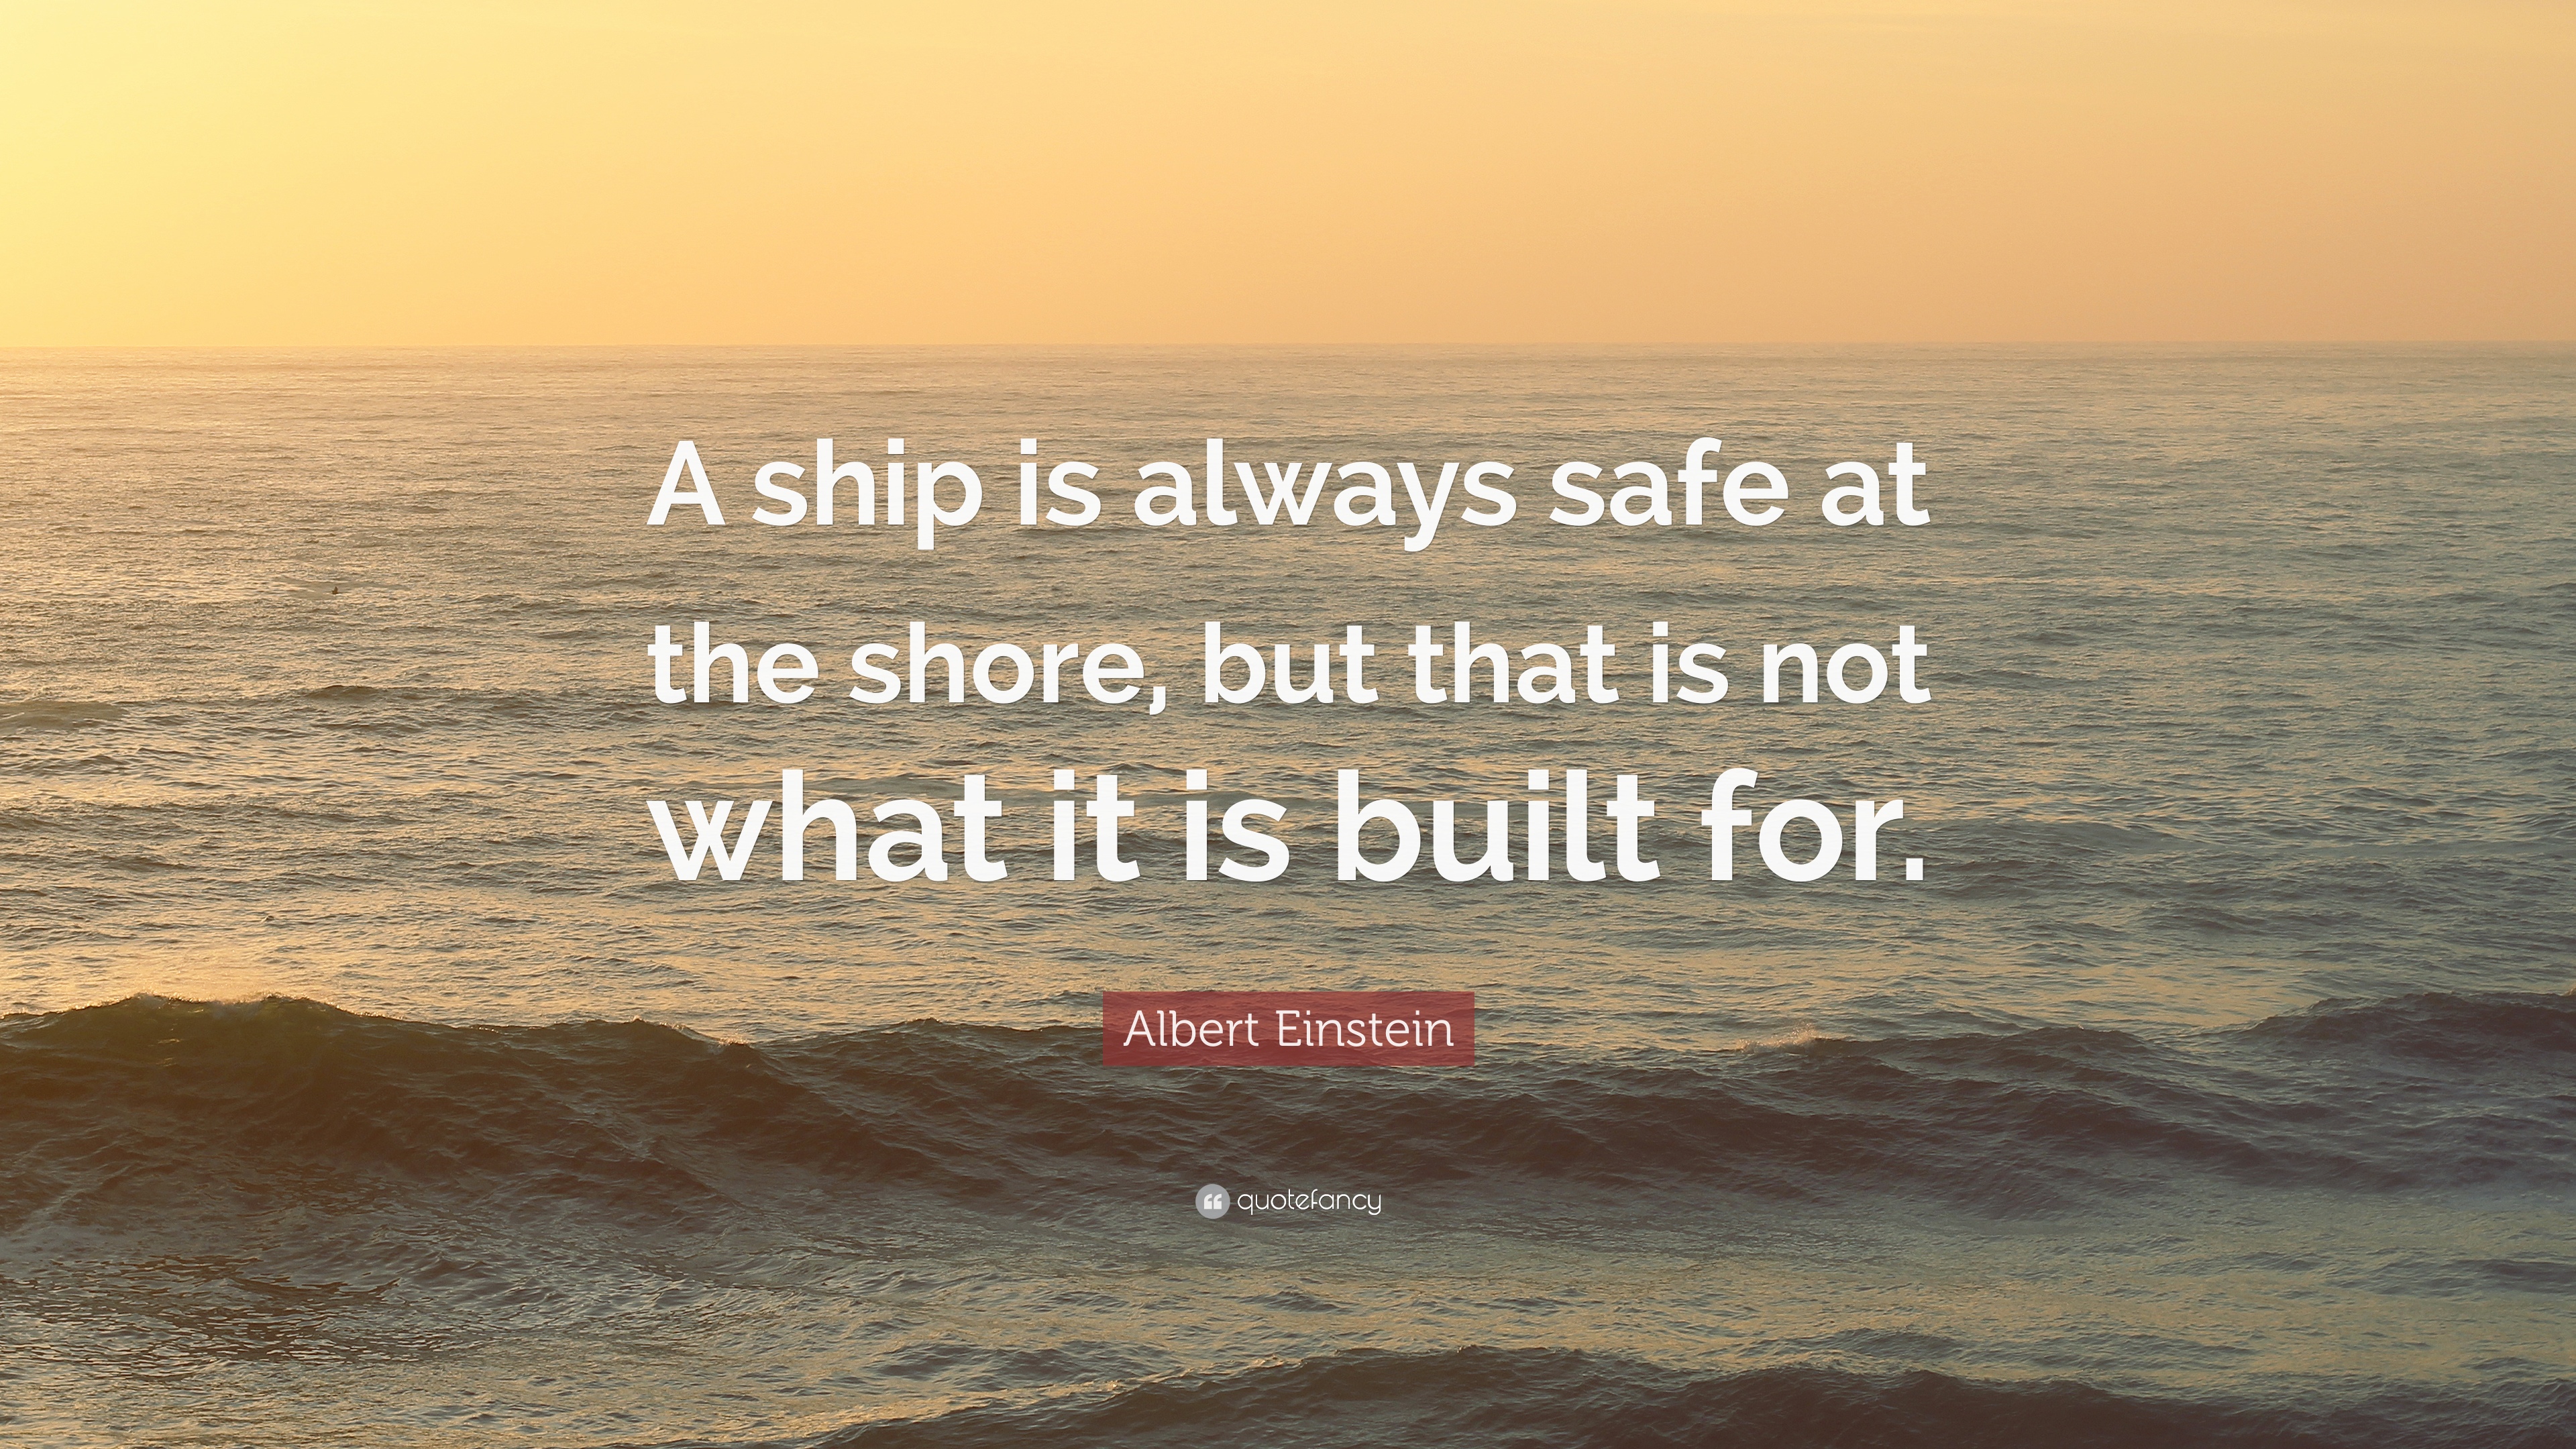 Albert Einstein Quote: “A ship is always safe at the shore, but that ...